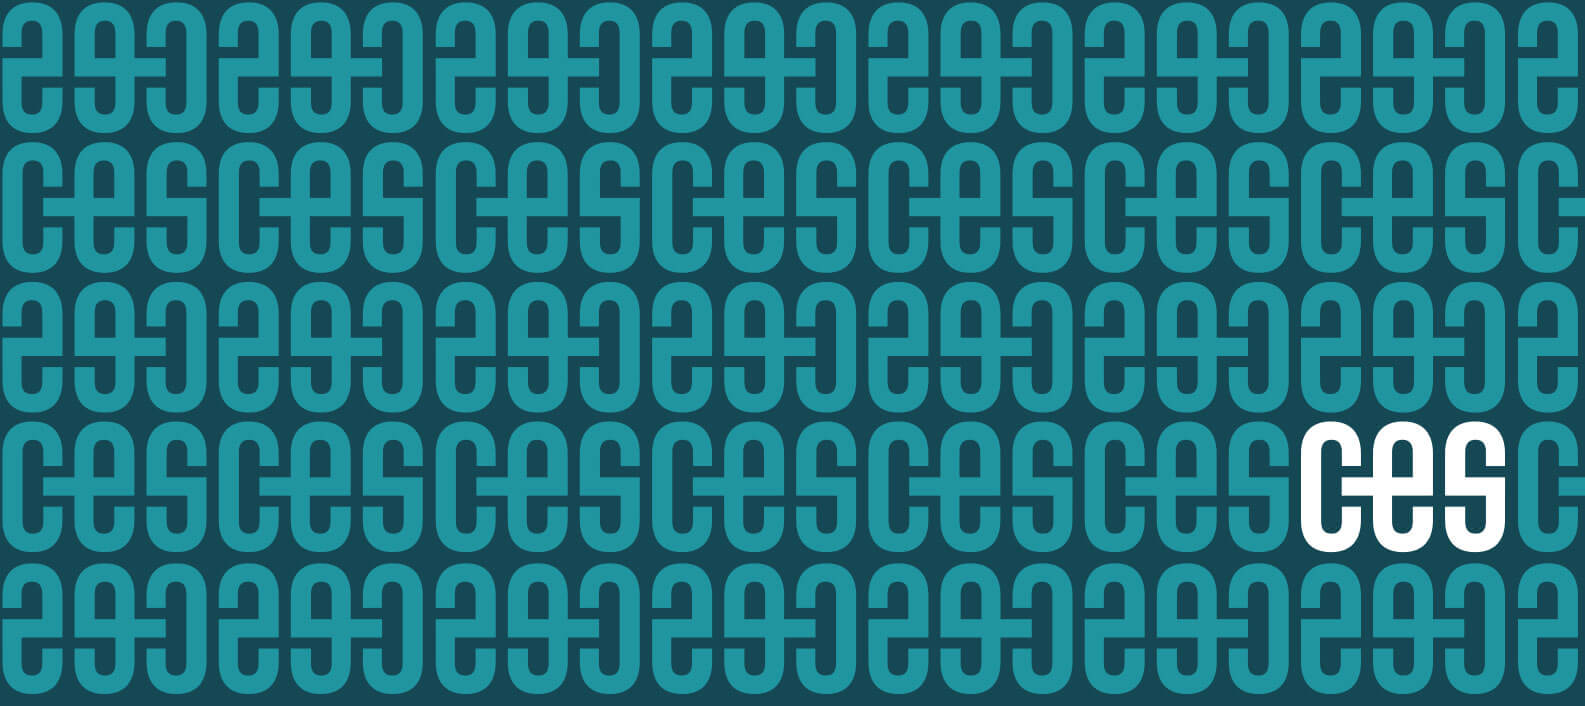 CES Consulting branded pattern by Jacober Creative